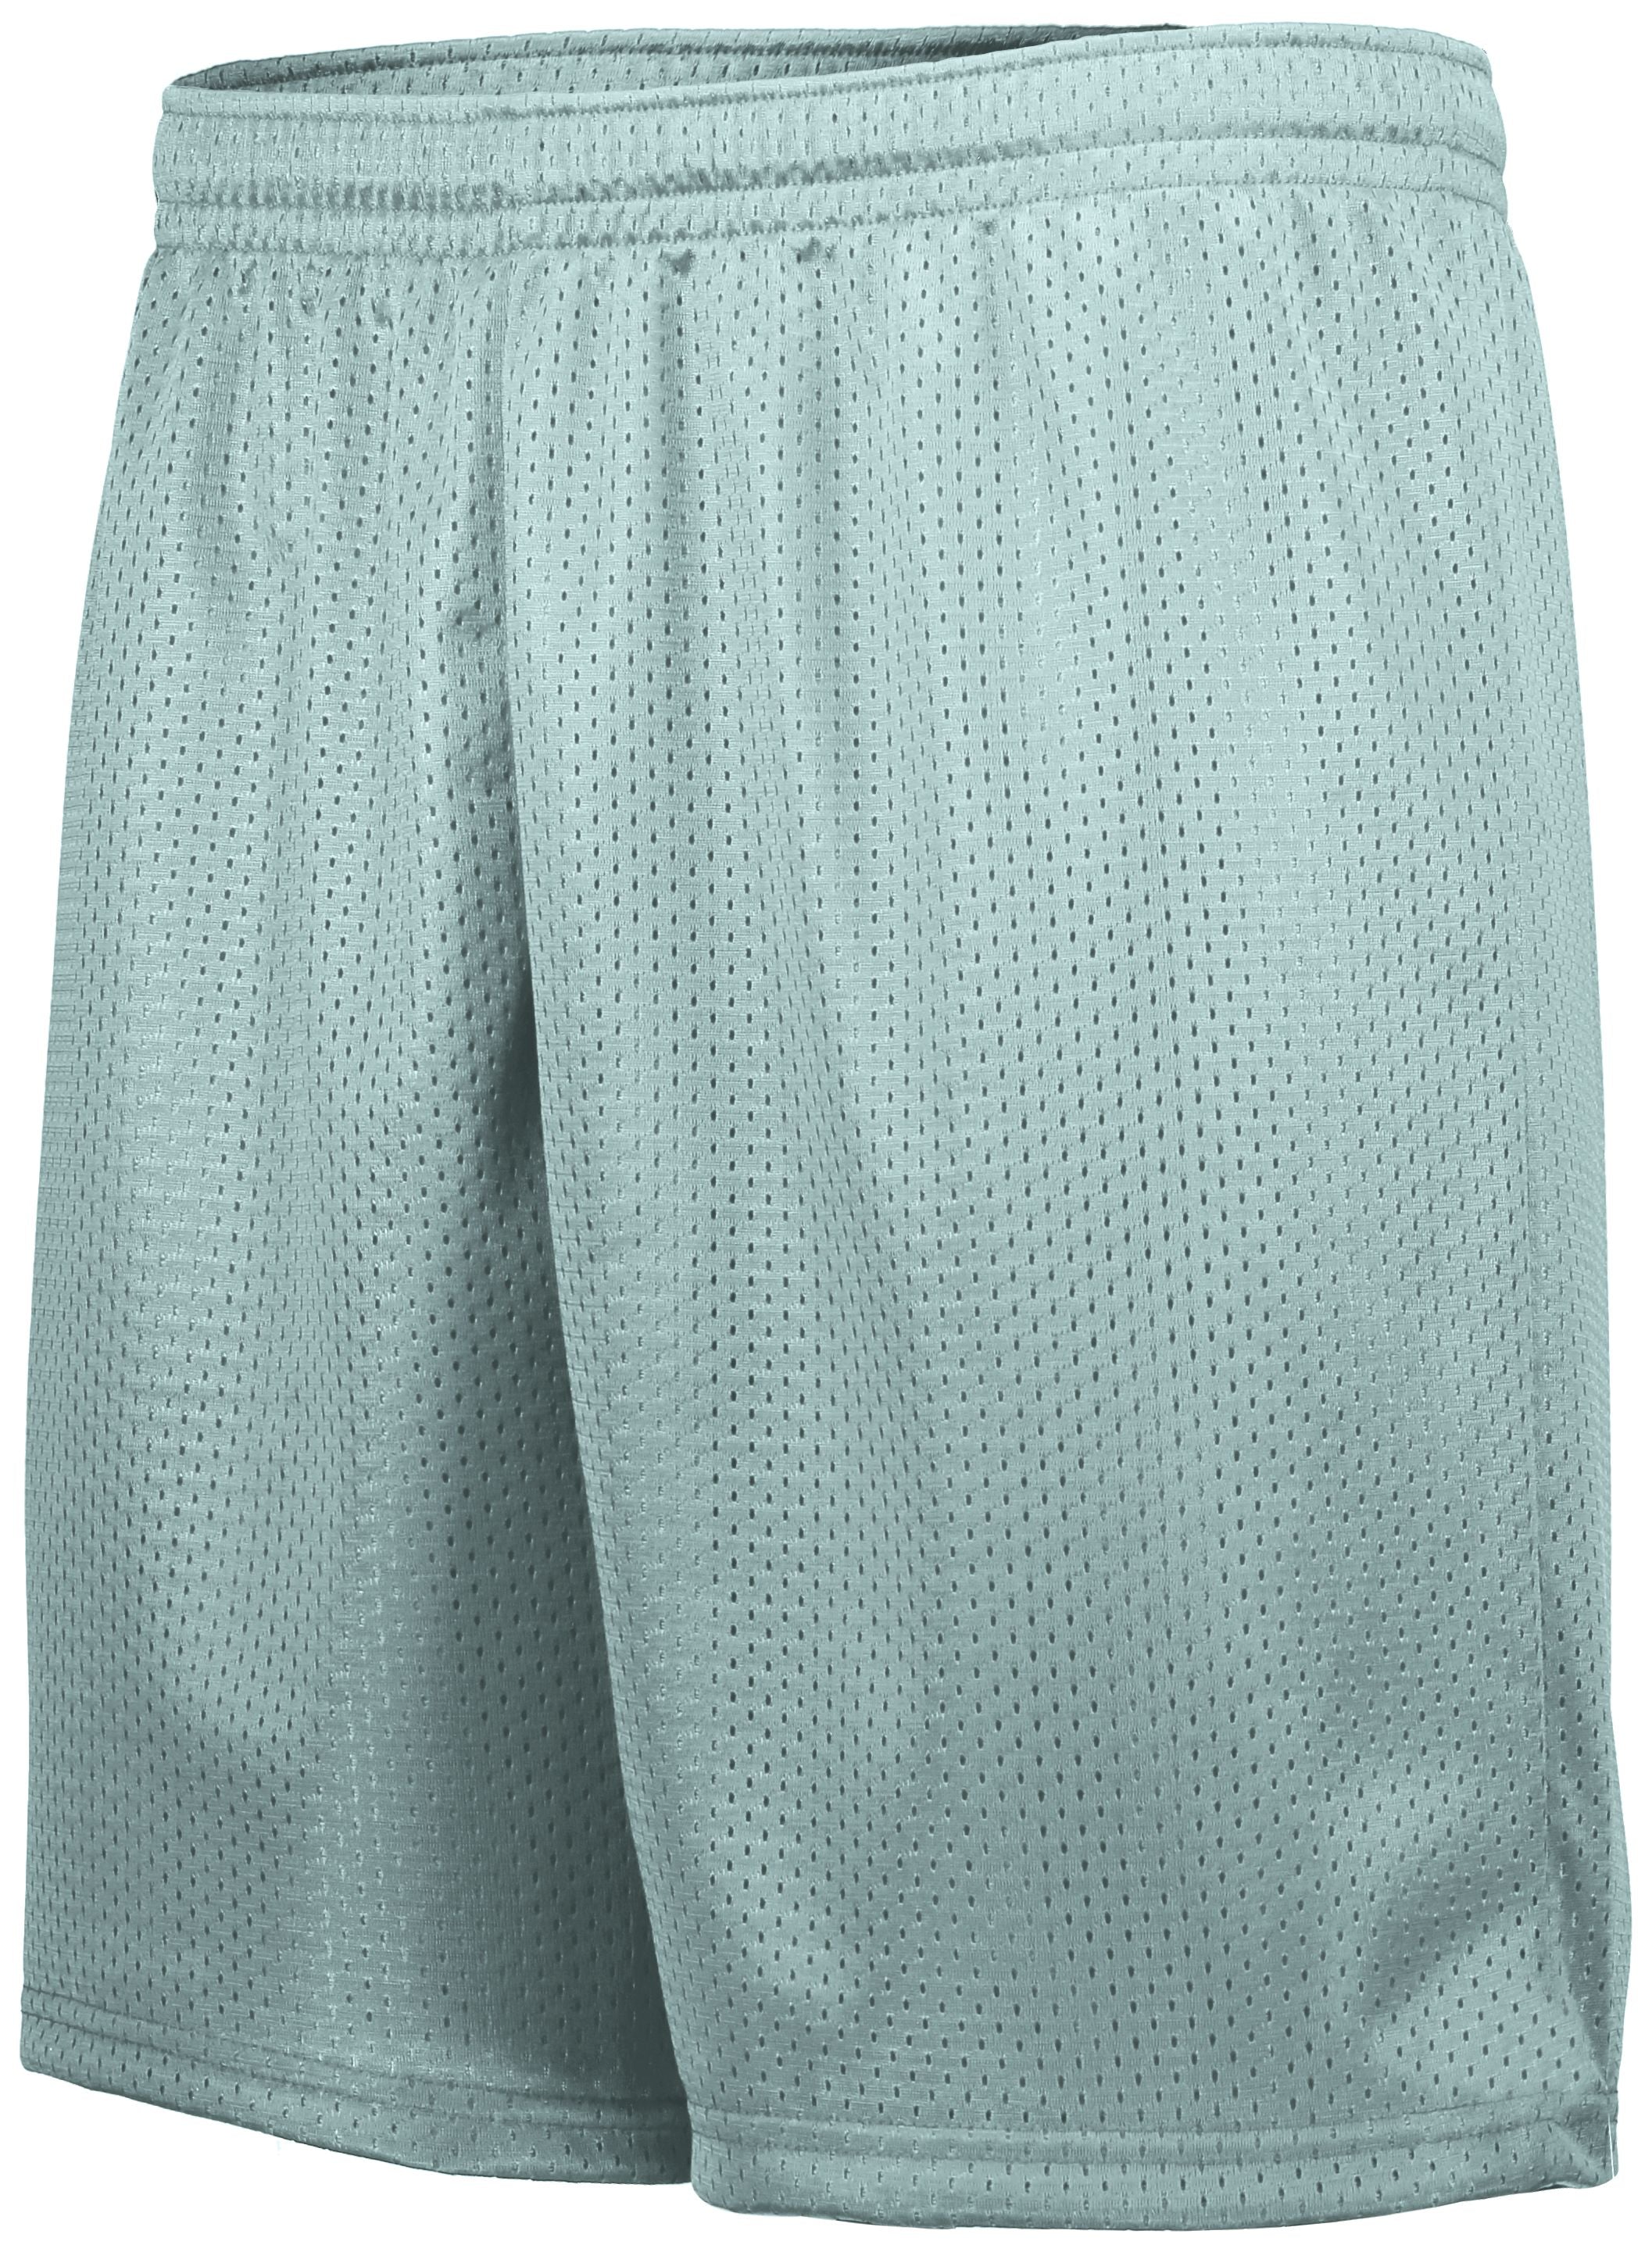 Augusta Sportswear Tricot Mesh Shorts in Silver  -Part of the Adult, Adult-Shorts, Augusta-Products product lines at KanaleyCreations.com